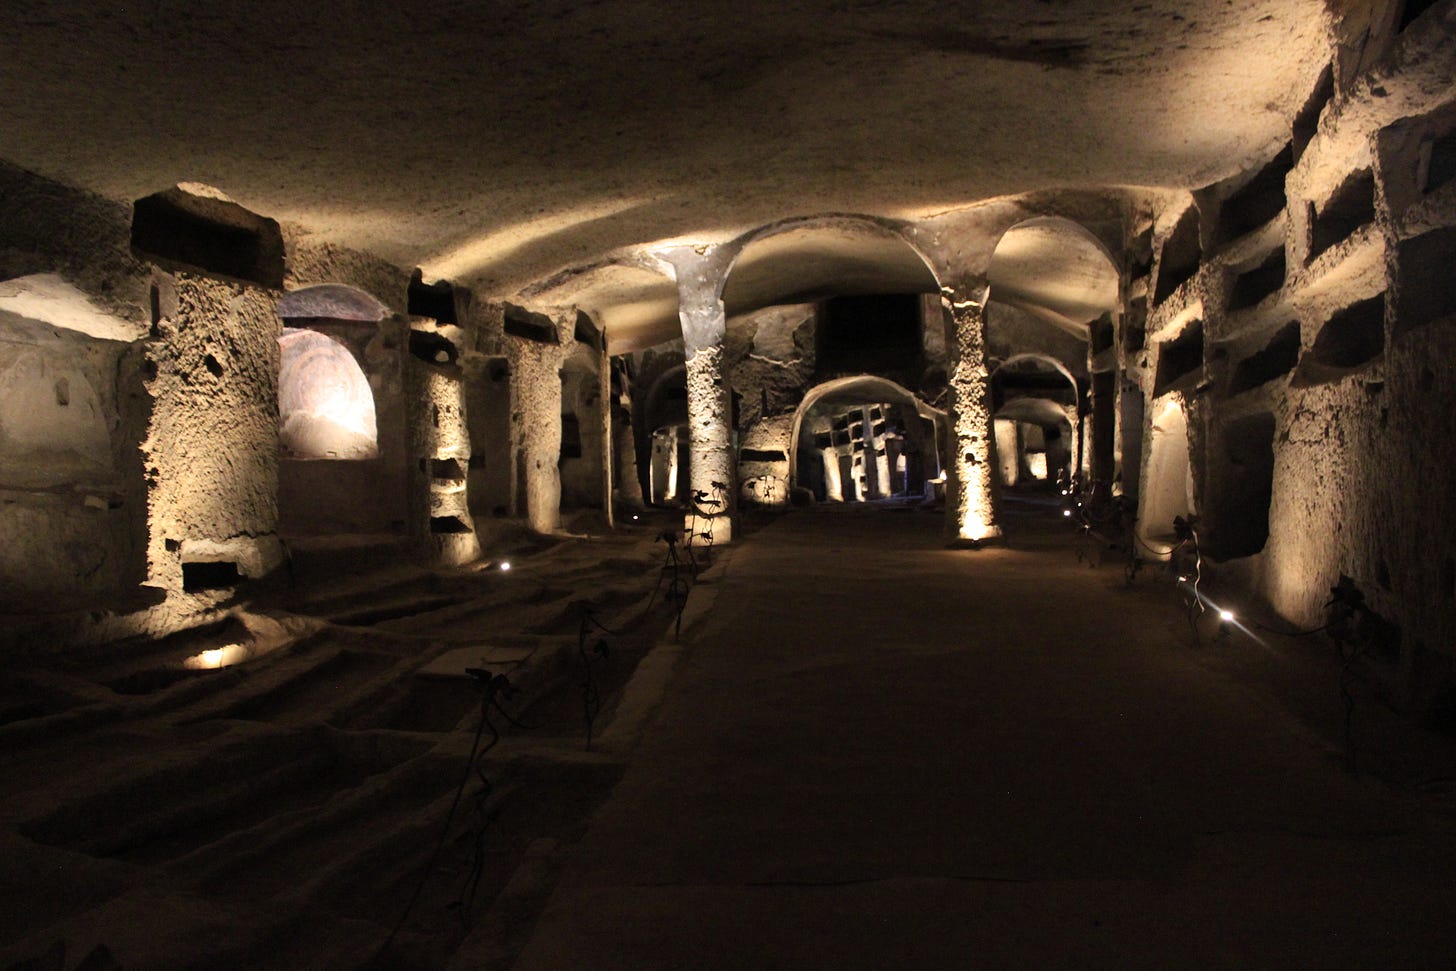 Catacombs fo San Gennaro - an underground space with graves dug into the walls.